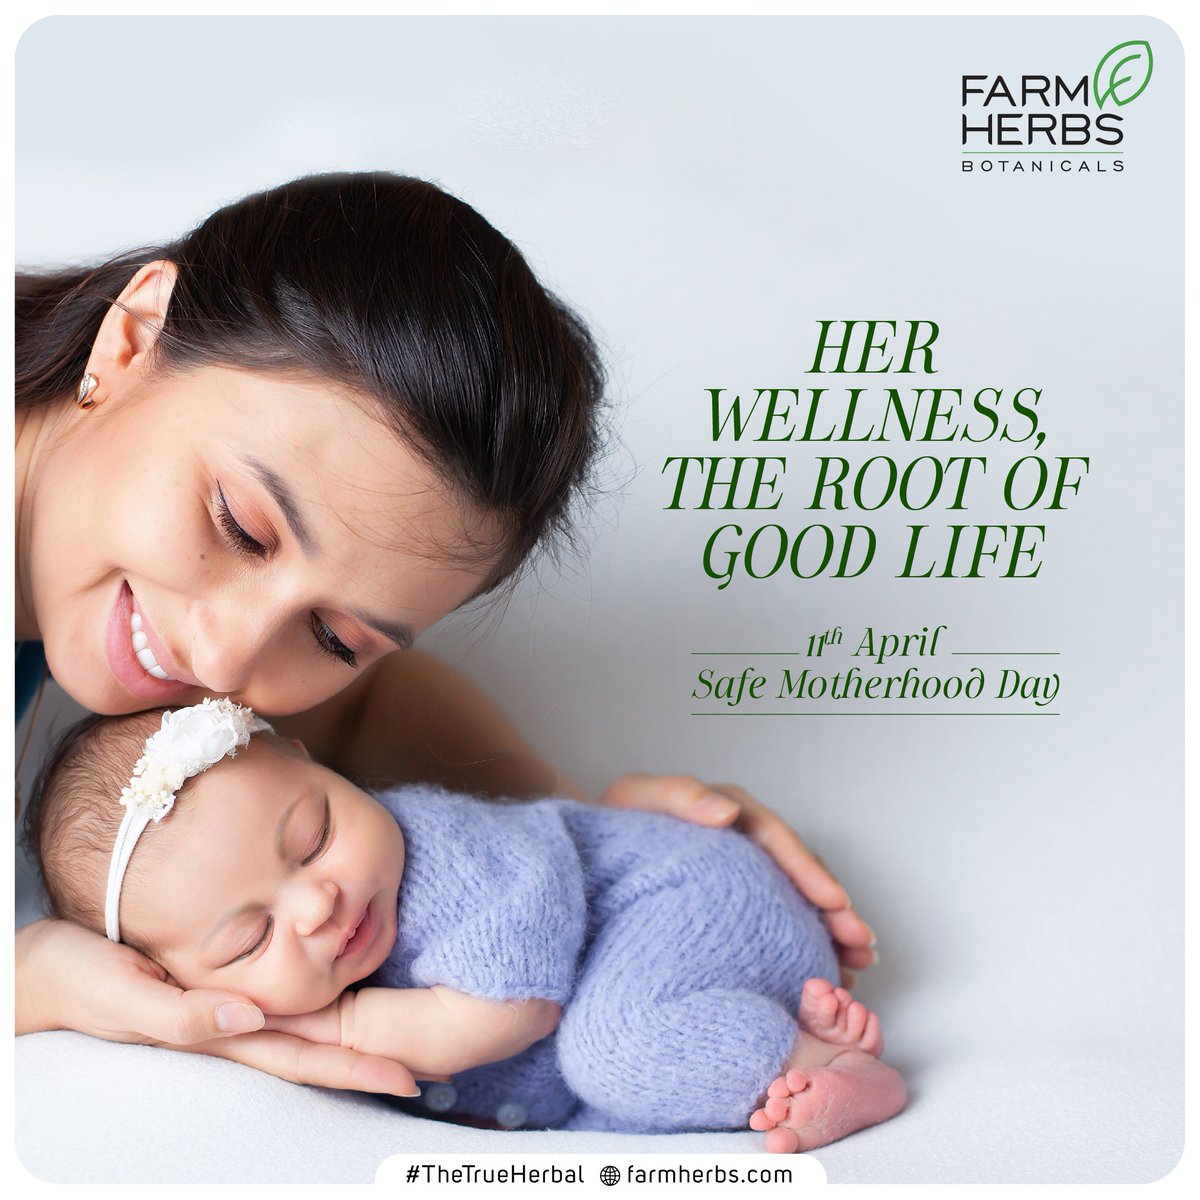 The journey of motherhood is precious beyond words. We believe in Mother Nature's power to give mothers the best.💚
Choose Farmherbs' Baby Products for your little one and experience the goodness of nature.

#Farmherbs  #BeautyandBabyCare  #NationalSafeMotherhoodDay